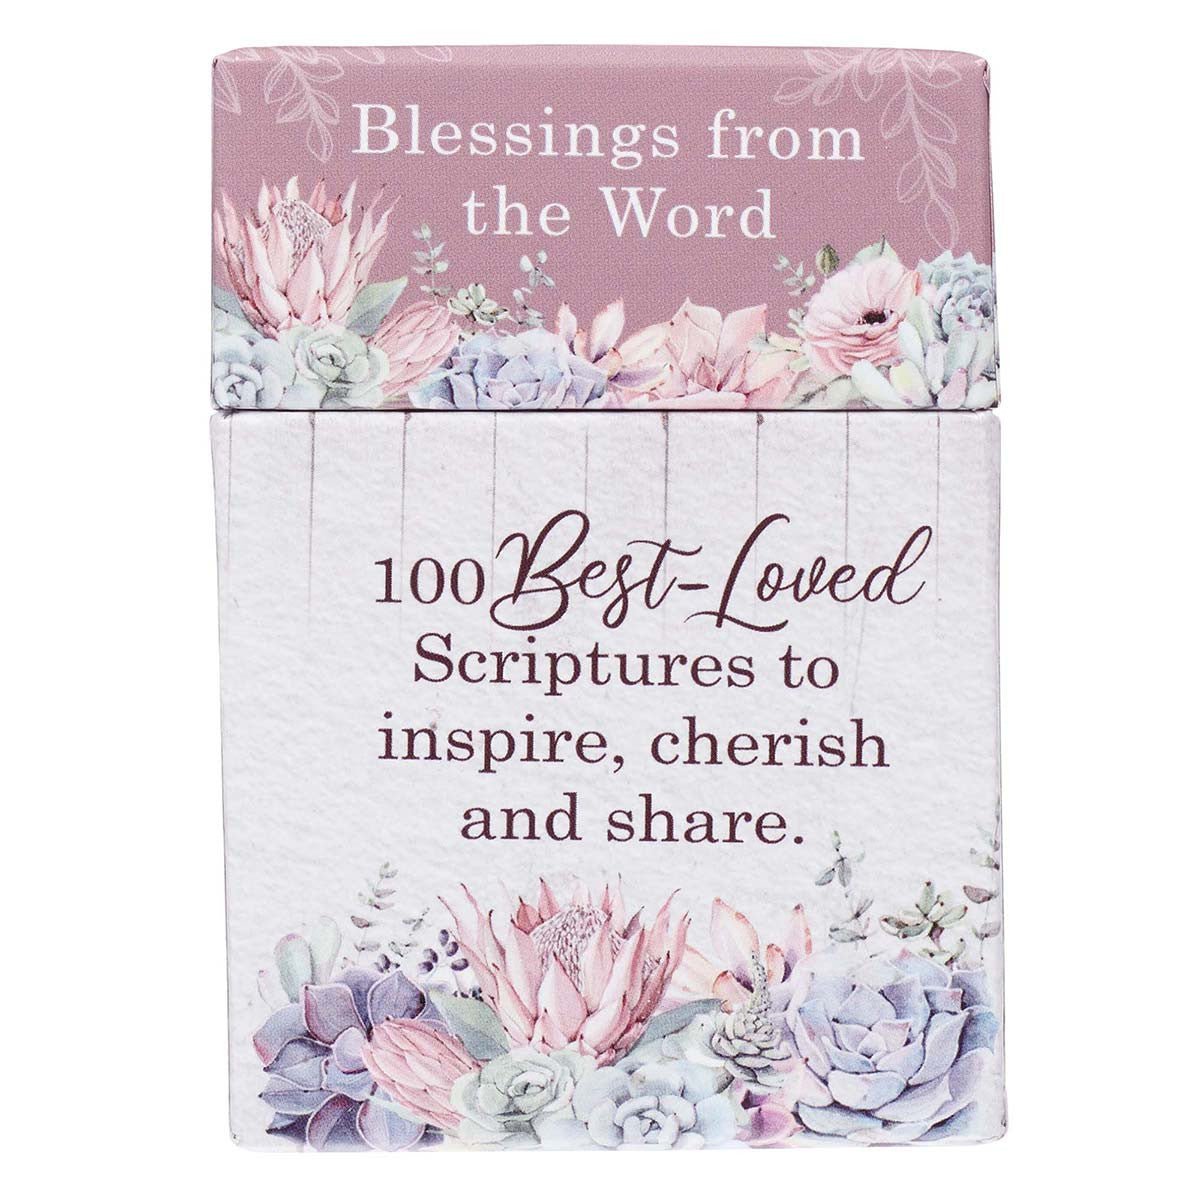 Favorite Bible Verses to Bless Your Heart Box of Blessings | 2FruitBearers